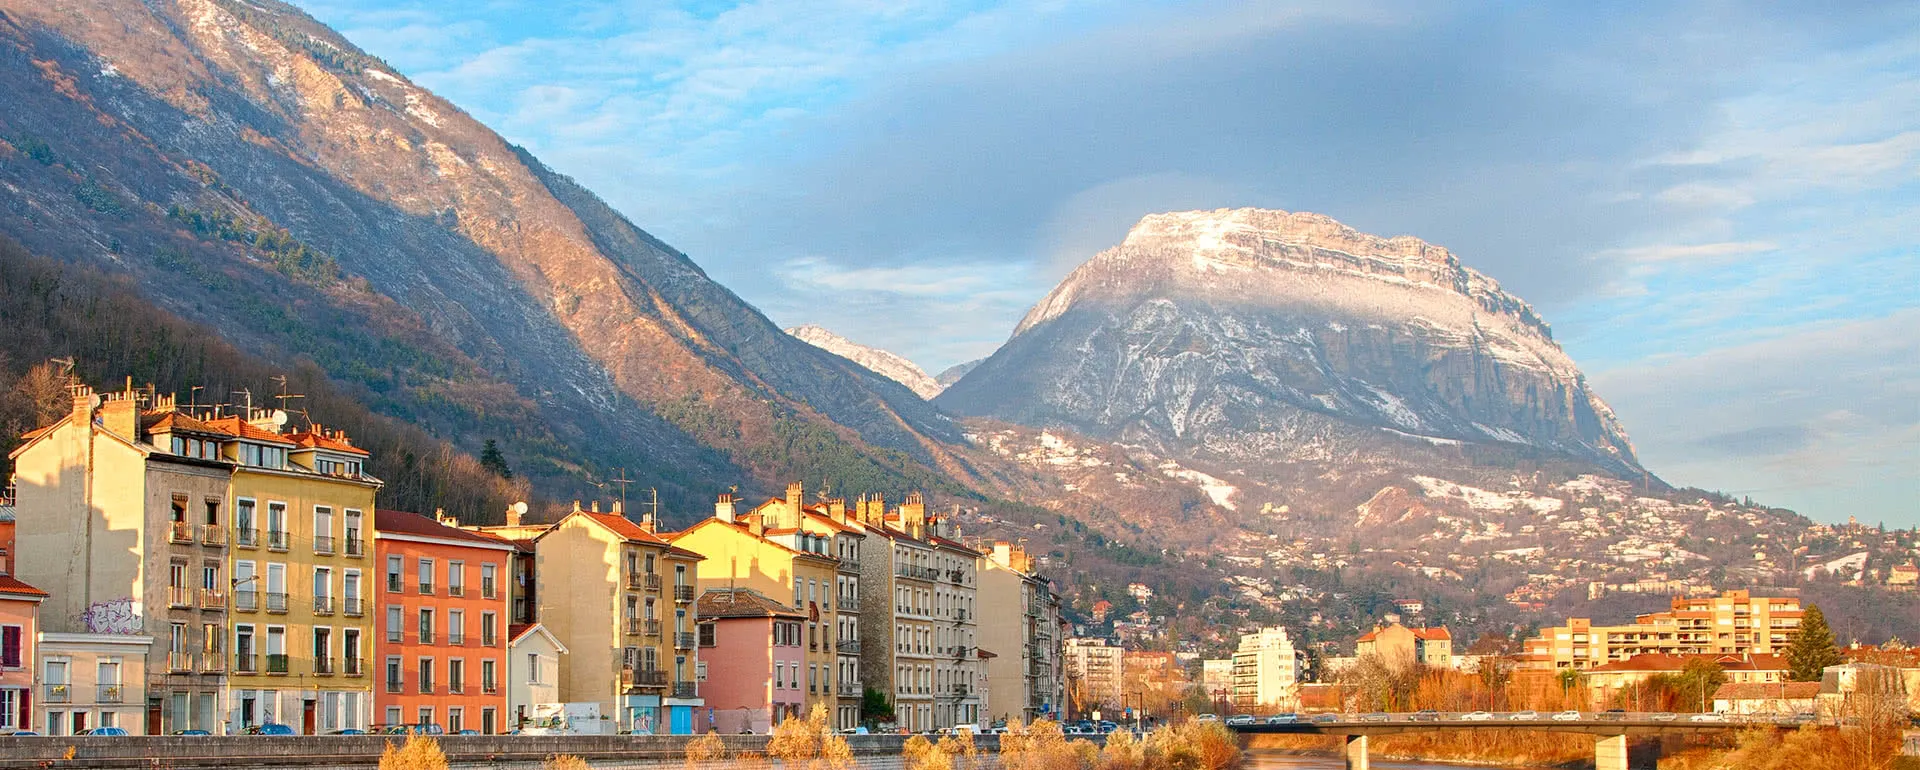 Meeting and conference location Grenoble